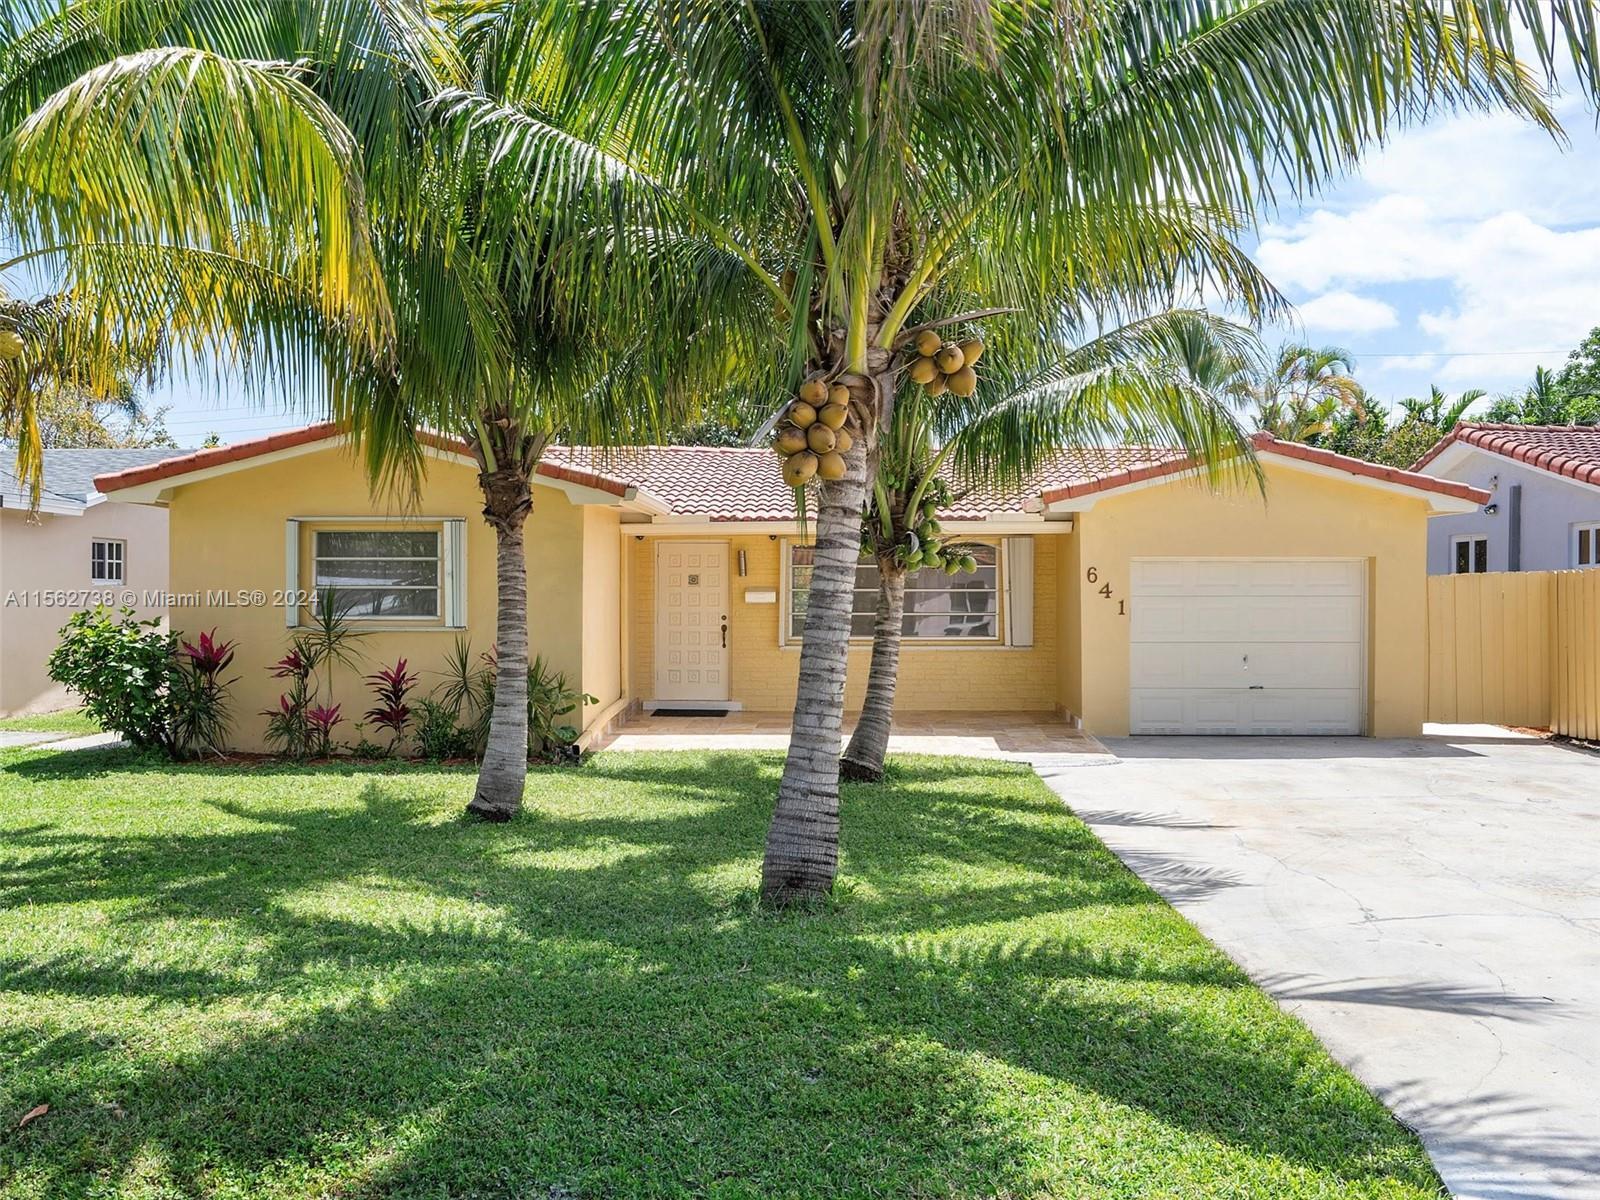 TURNKEY and no HOA with great floor plan, beautiful home located in Hallandale Beach, features 3 bed